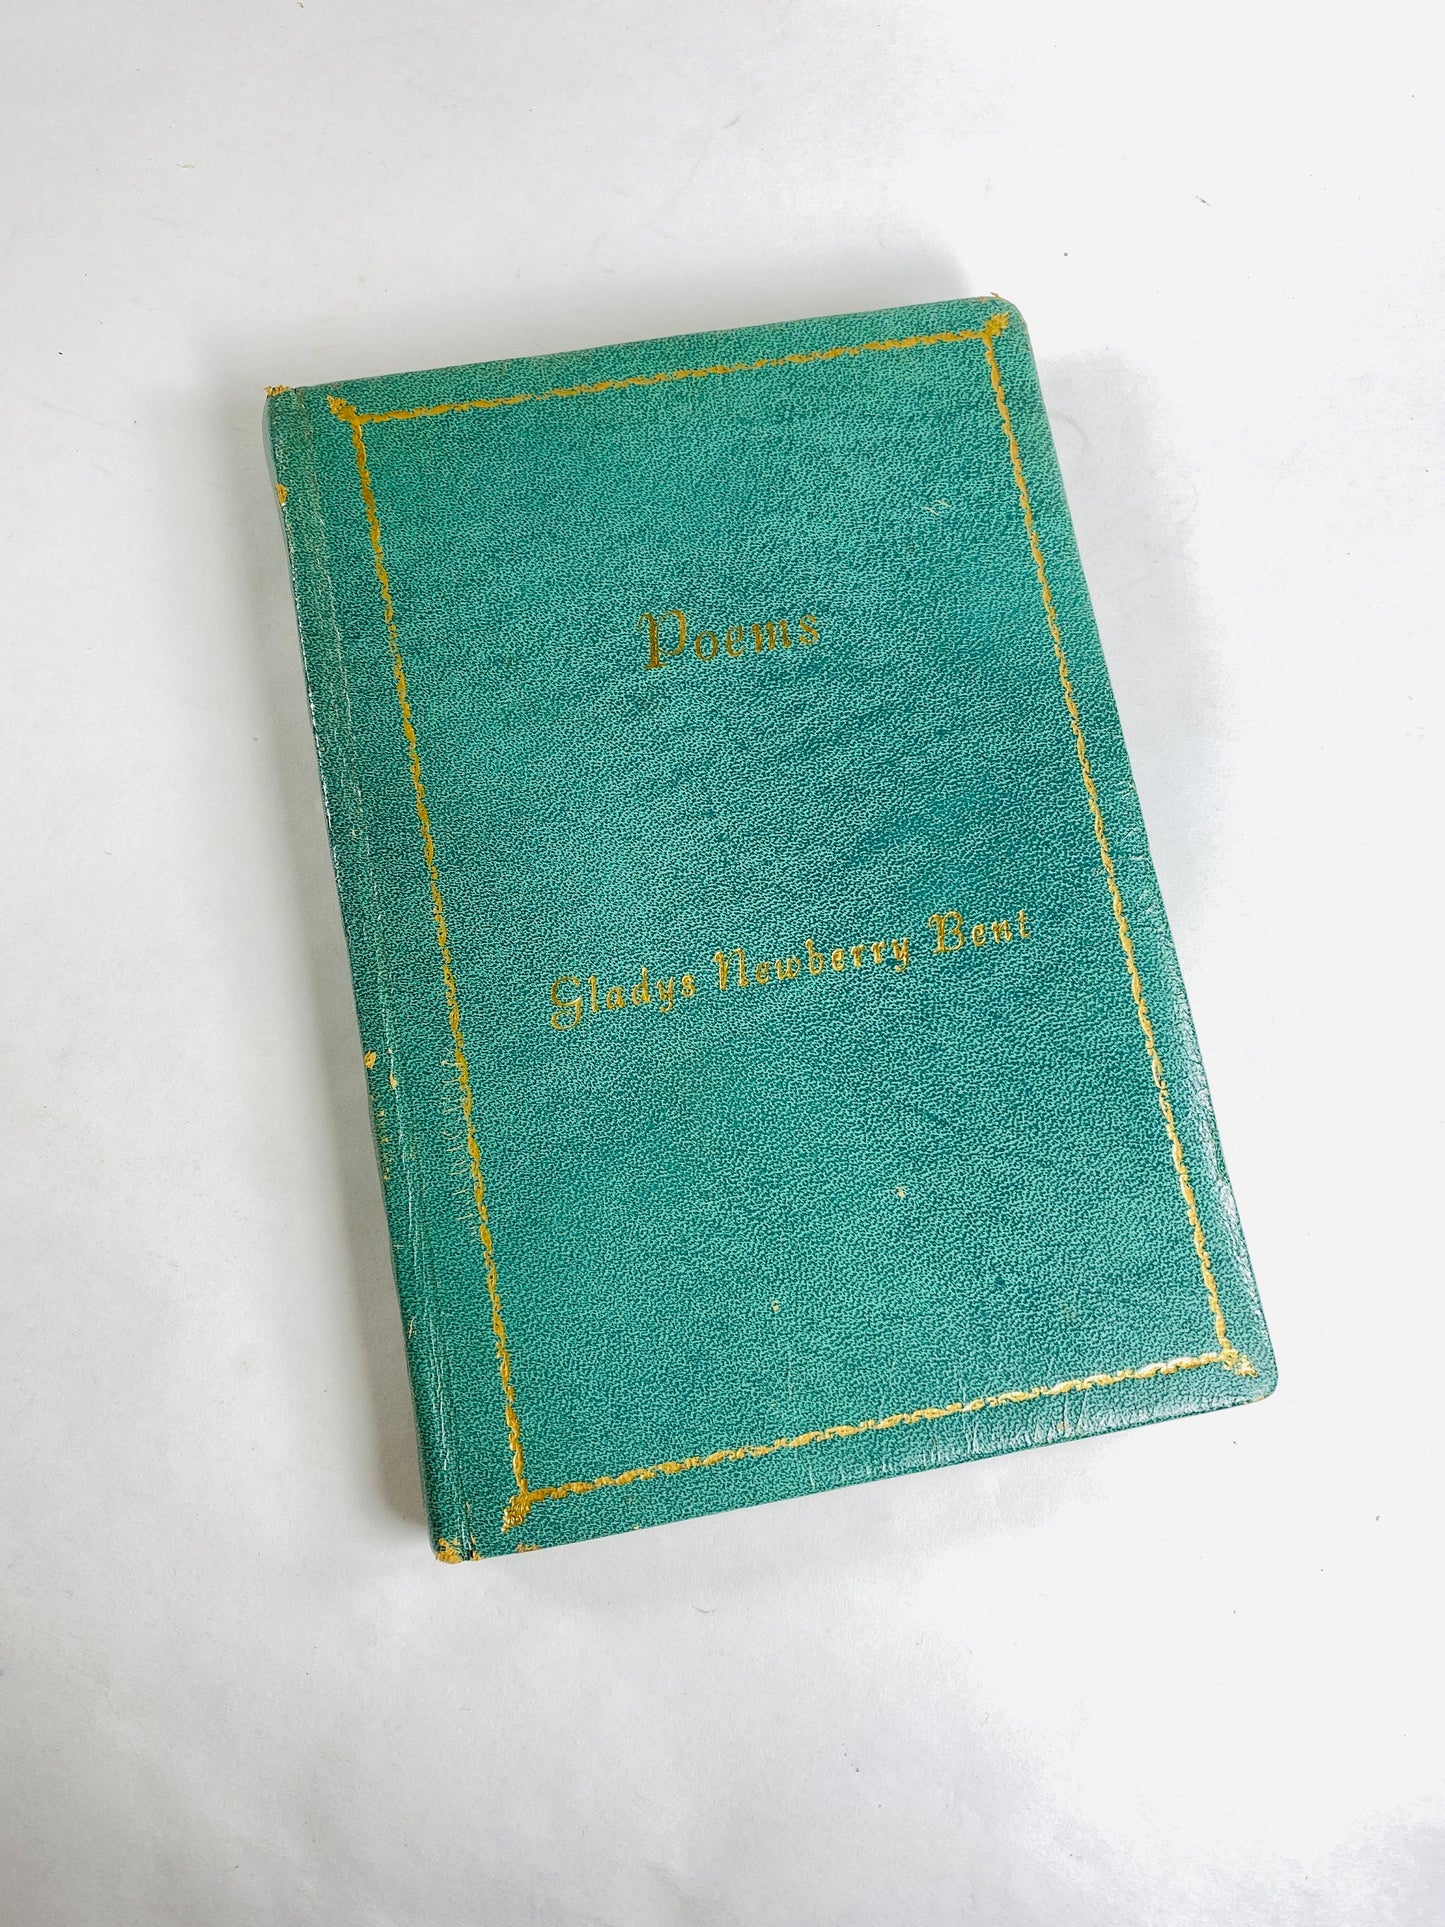 Gladys Newberry Bent married Charles Edward RARE poetry book SIGNED by Grace circa 1957 Manchester Connecticut Los Angeles California Pomona